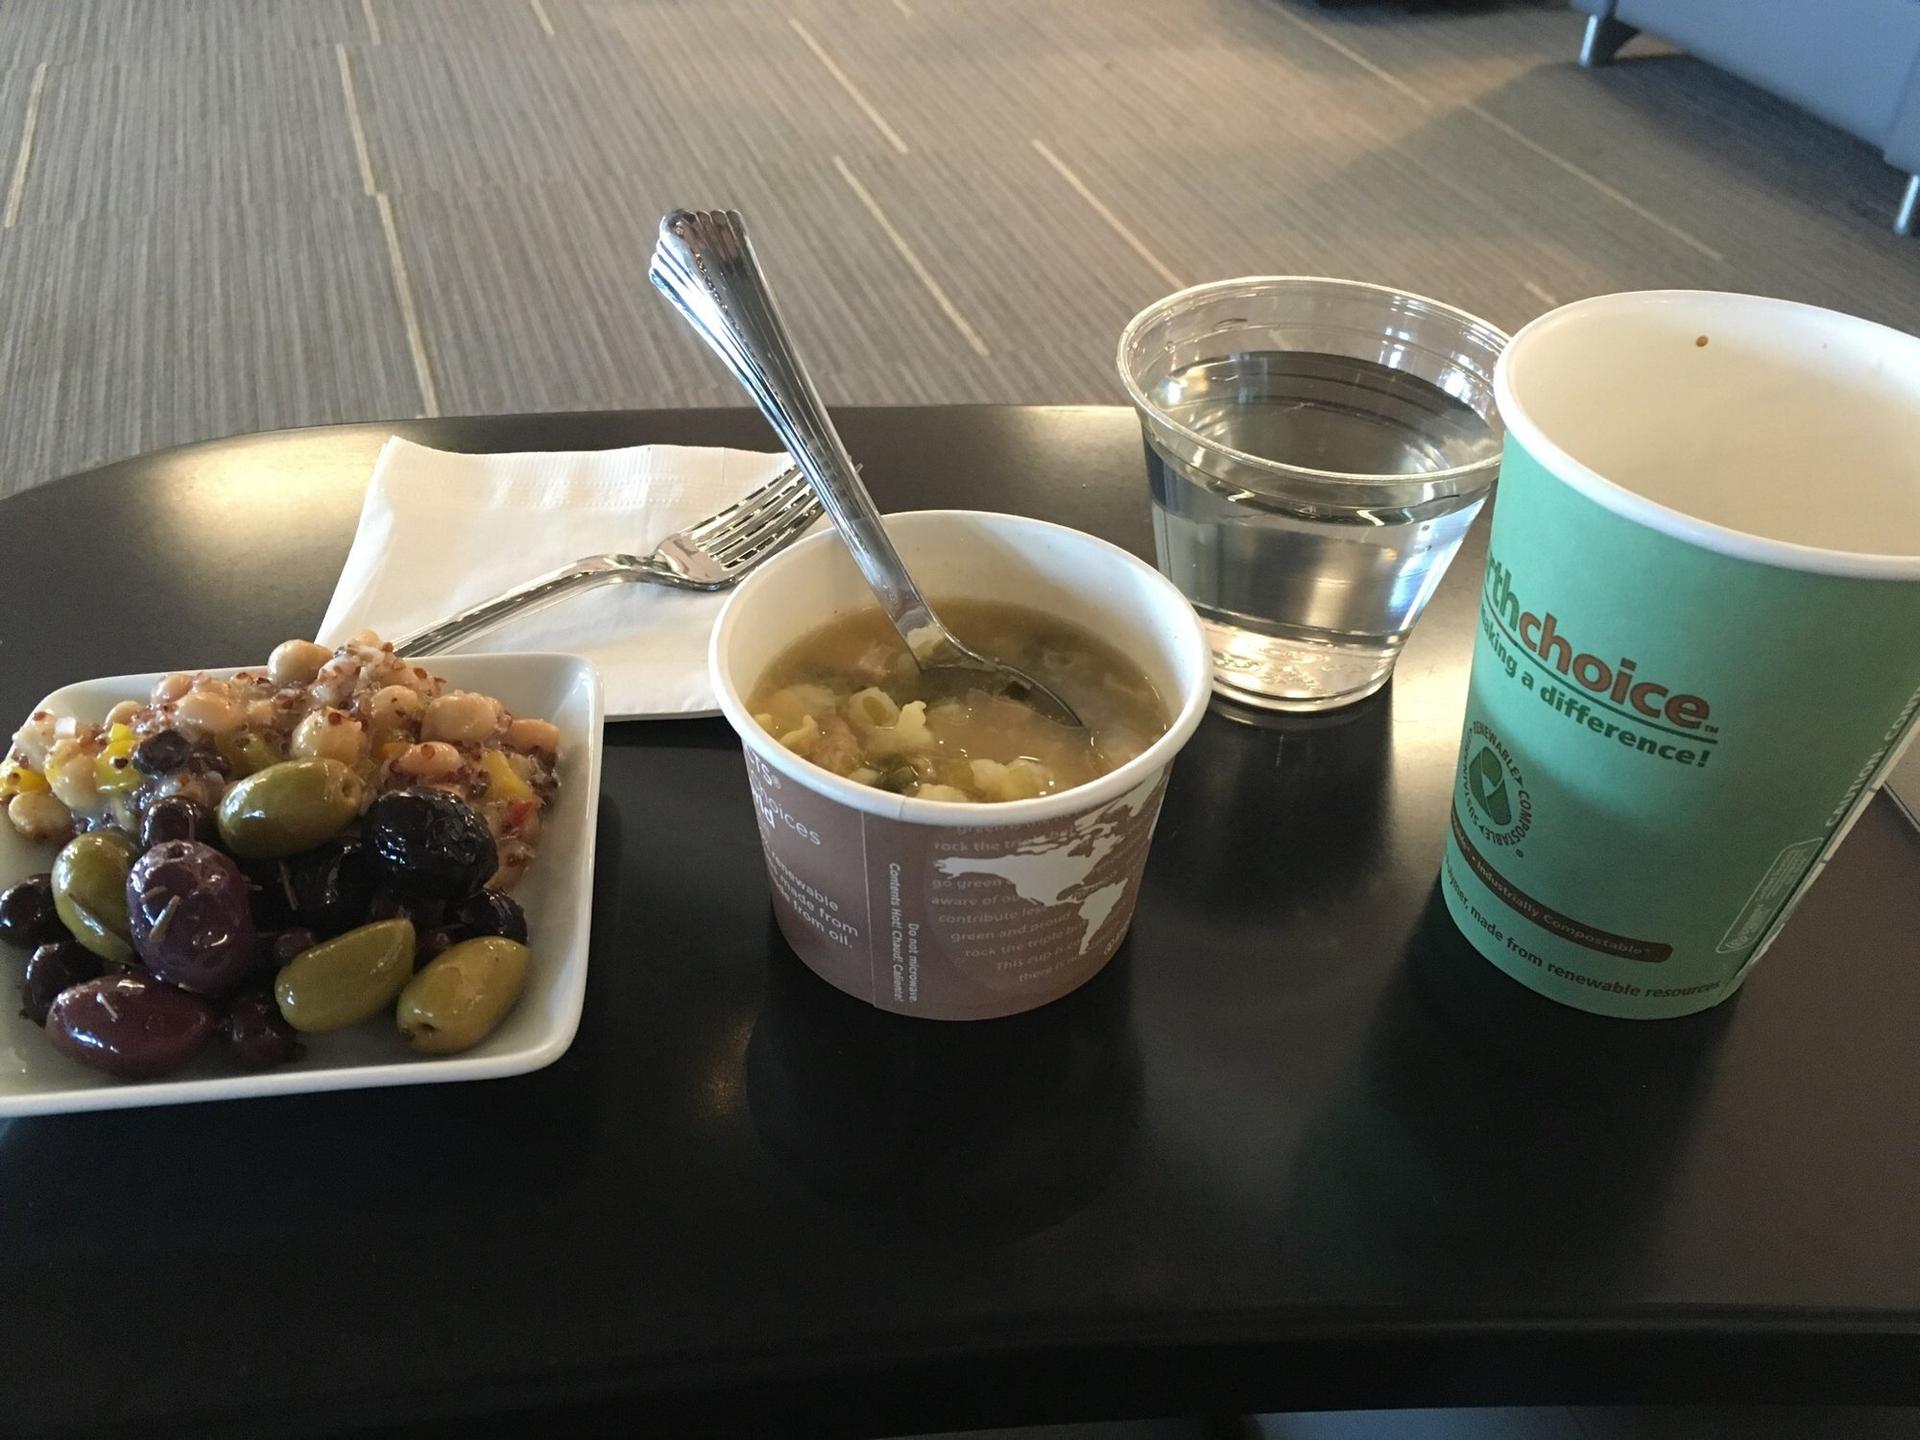 American Airlines Admirals Club (Gates A19-A21) image 15 of 16